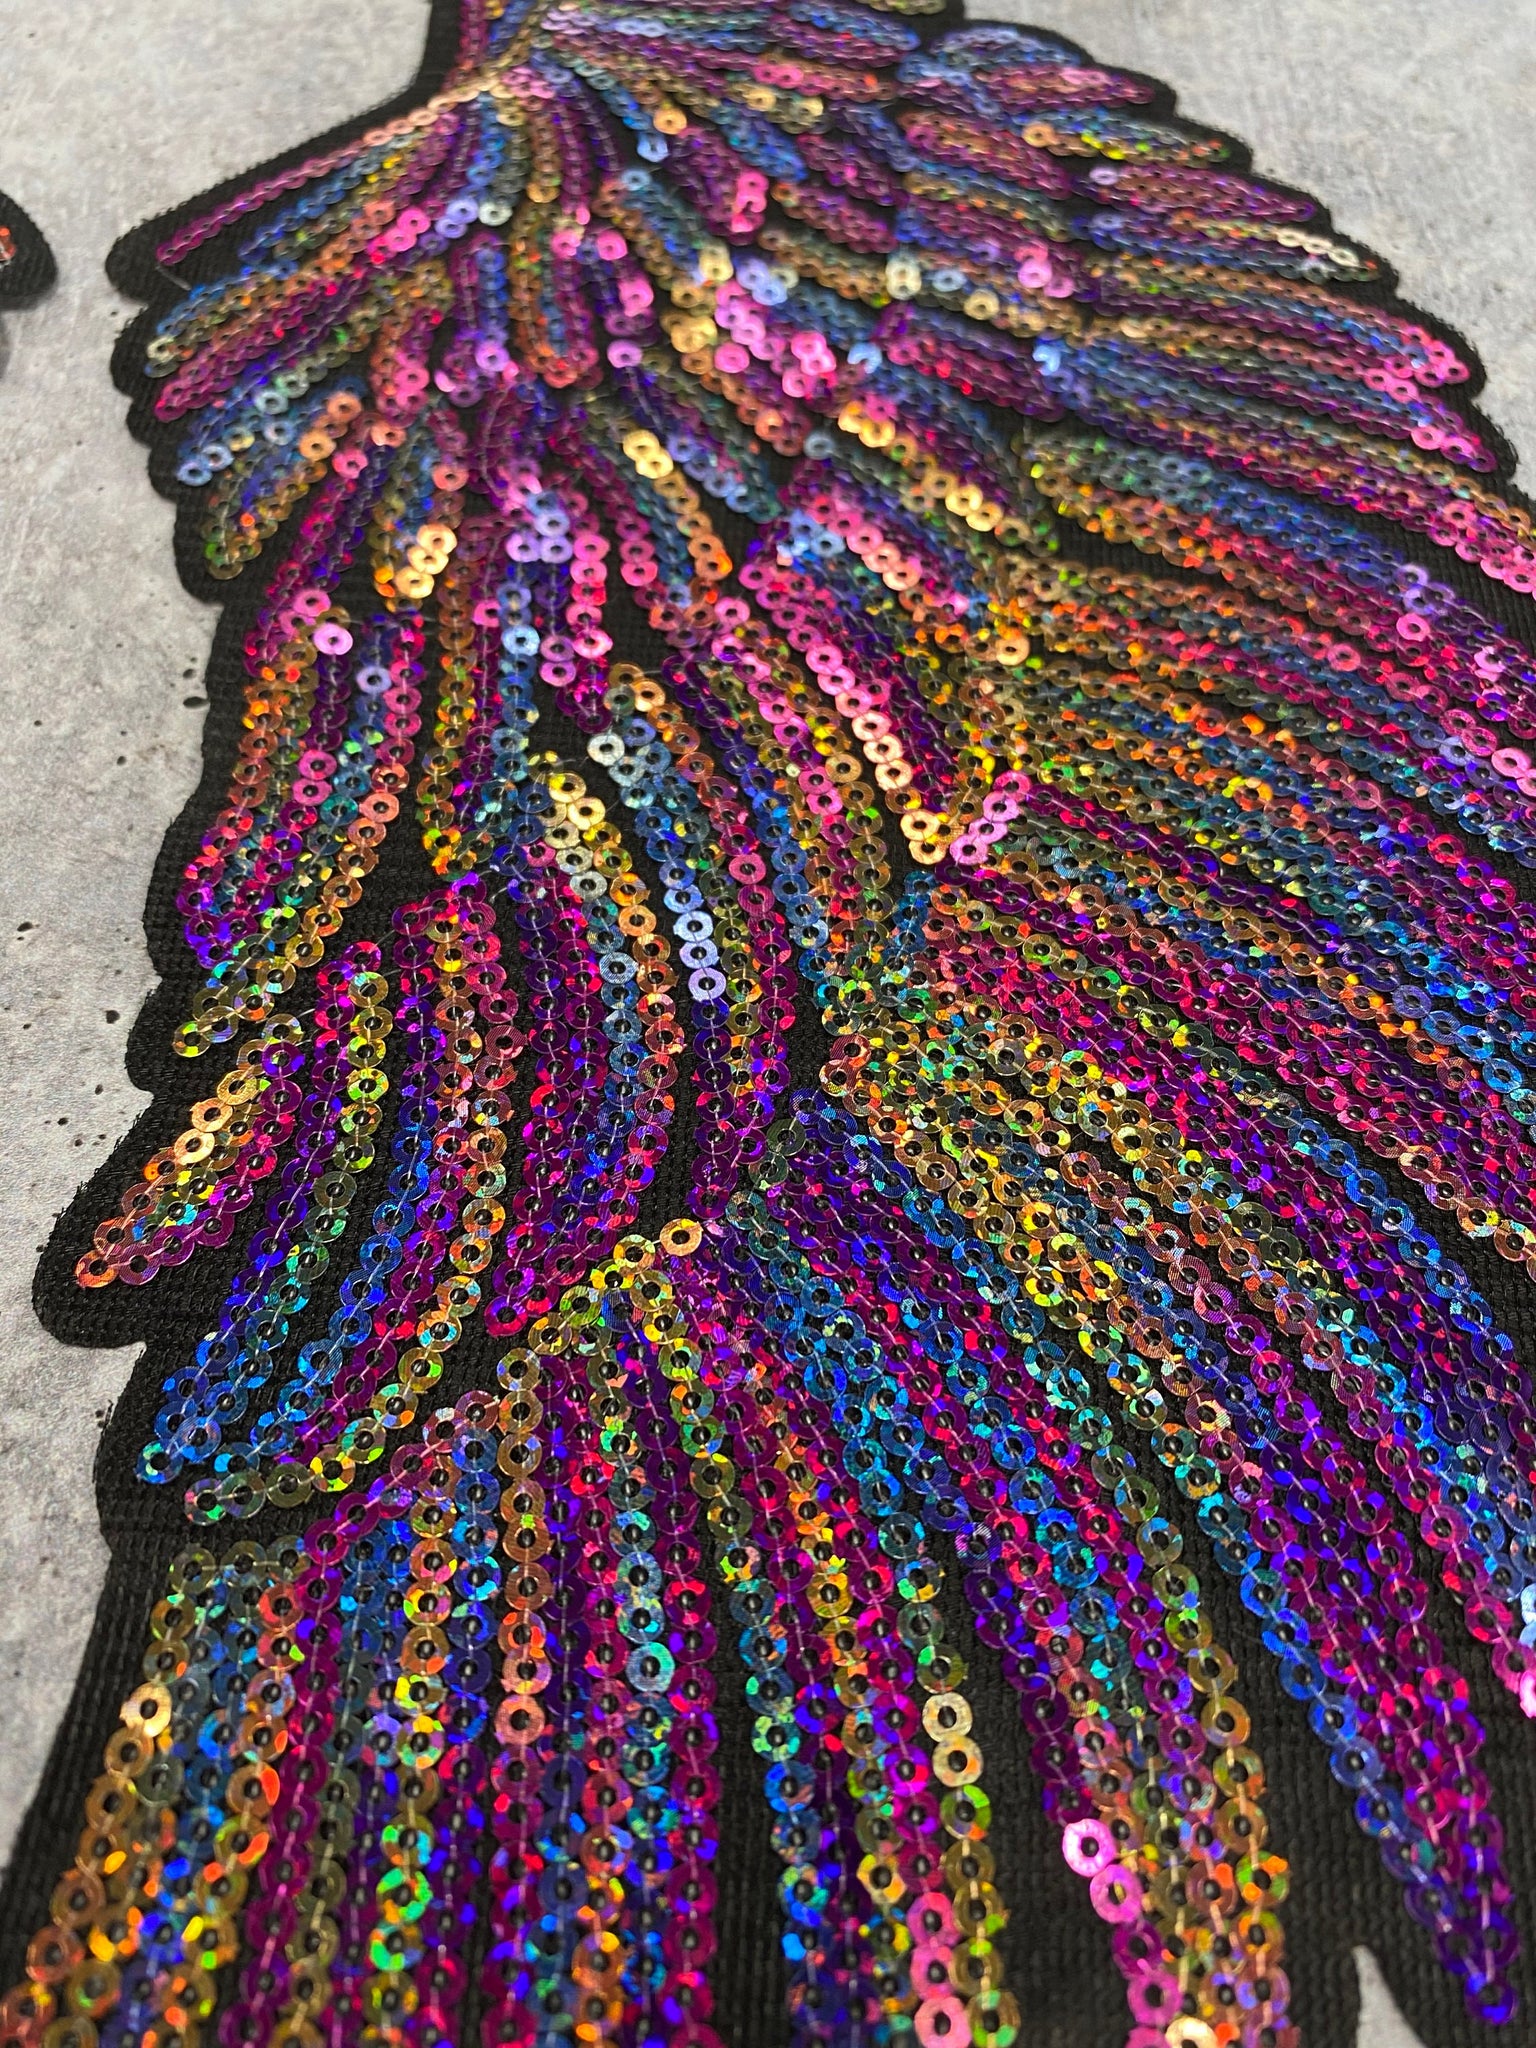 New Sequins, Multi-Colored Angel Wings Patch (iron-on) Size 10x5